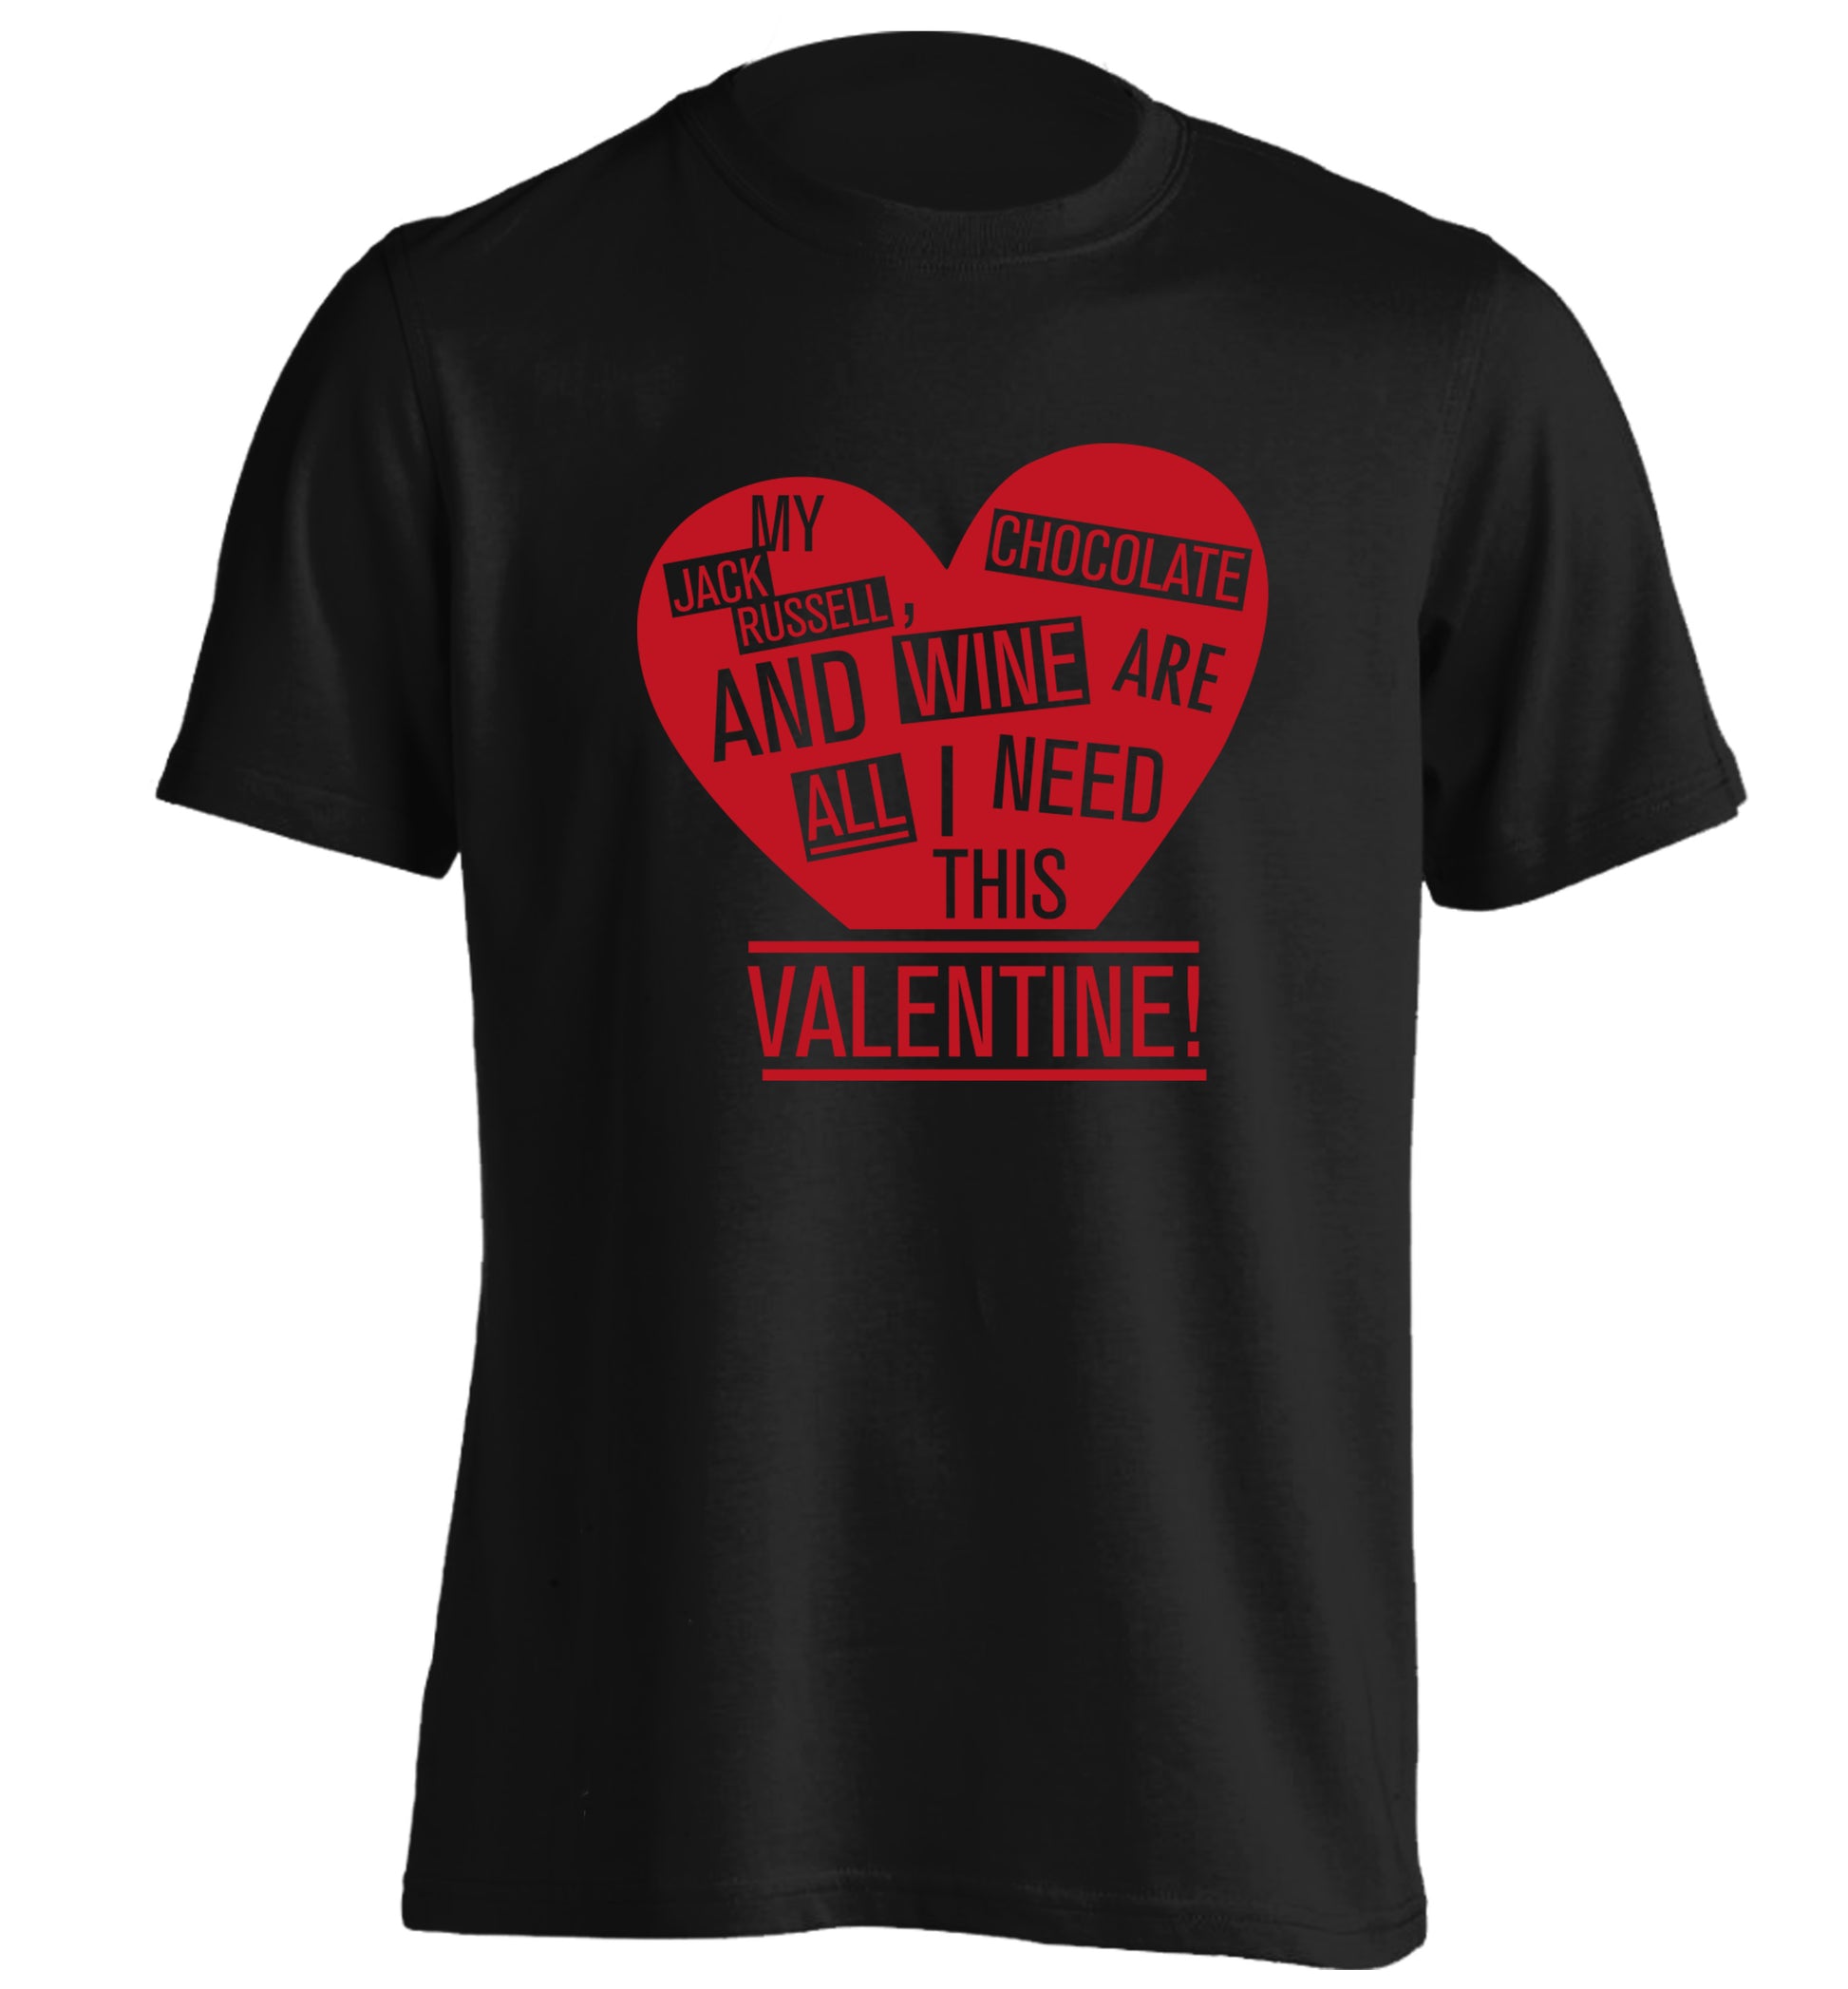 My jack russell, chocolate and wine are all I need this valentine! adults unisex black Tshirt 2XL